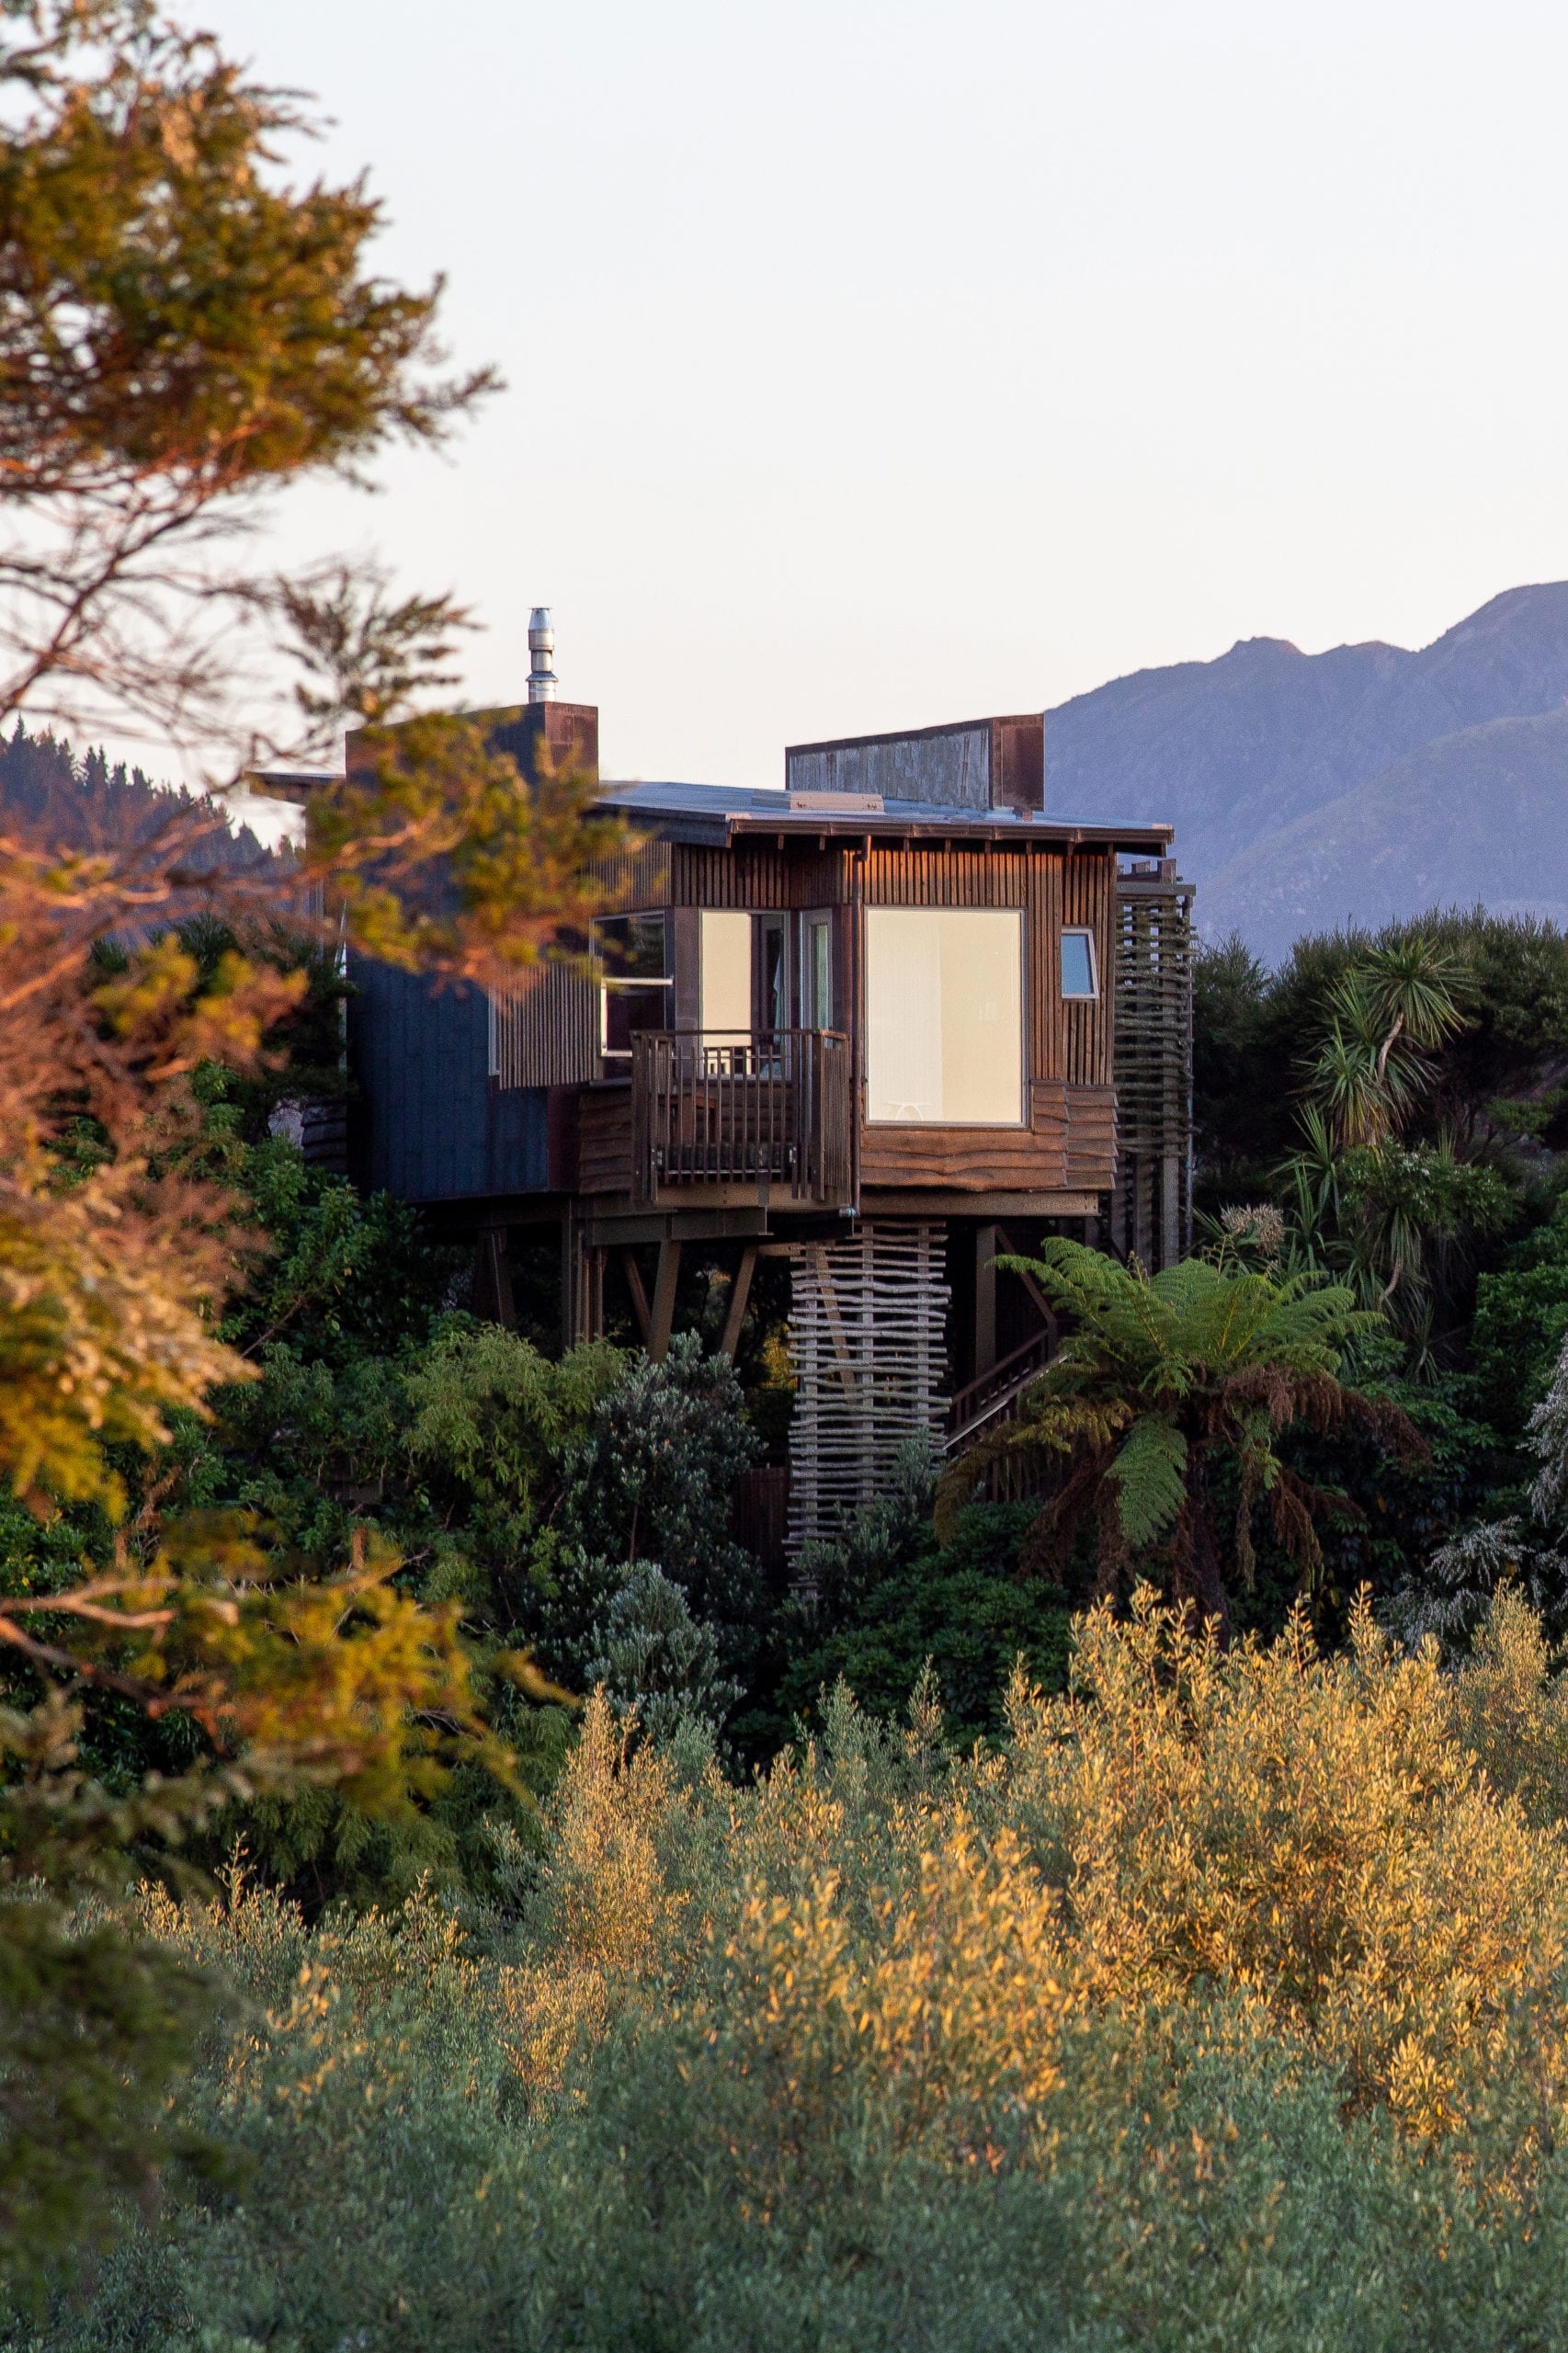 The best NZ luxury lodges and stays to book in 2021